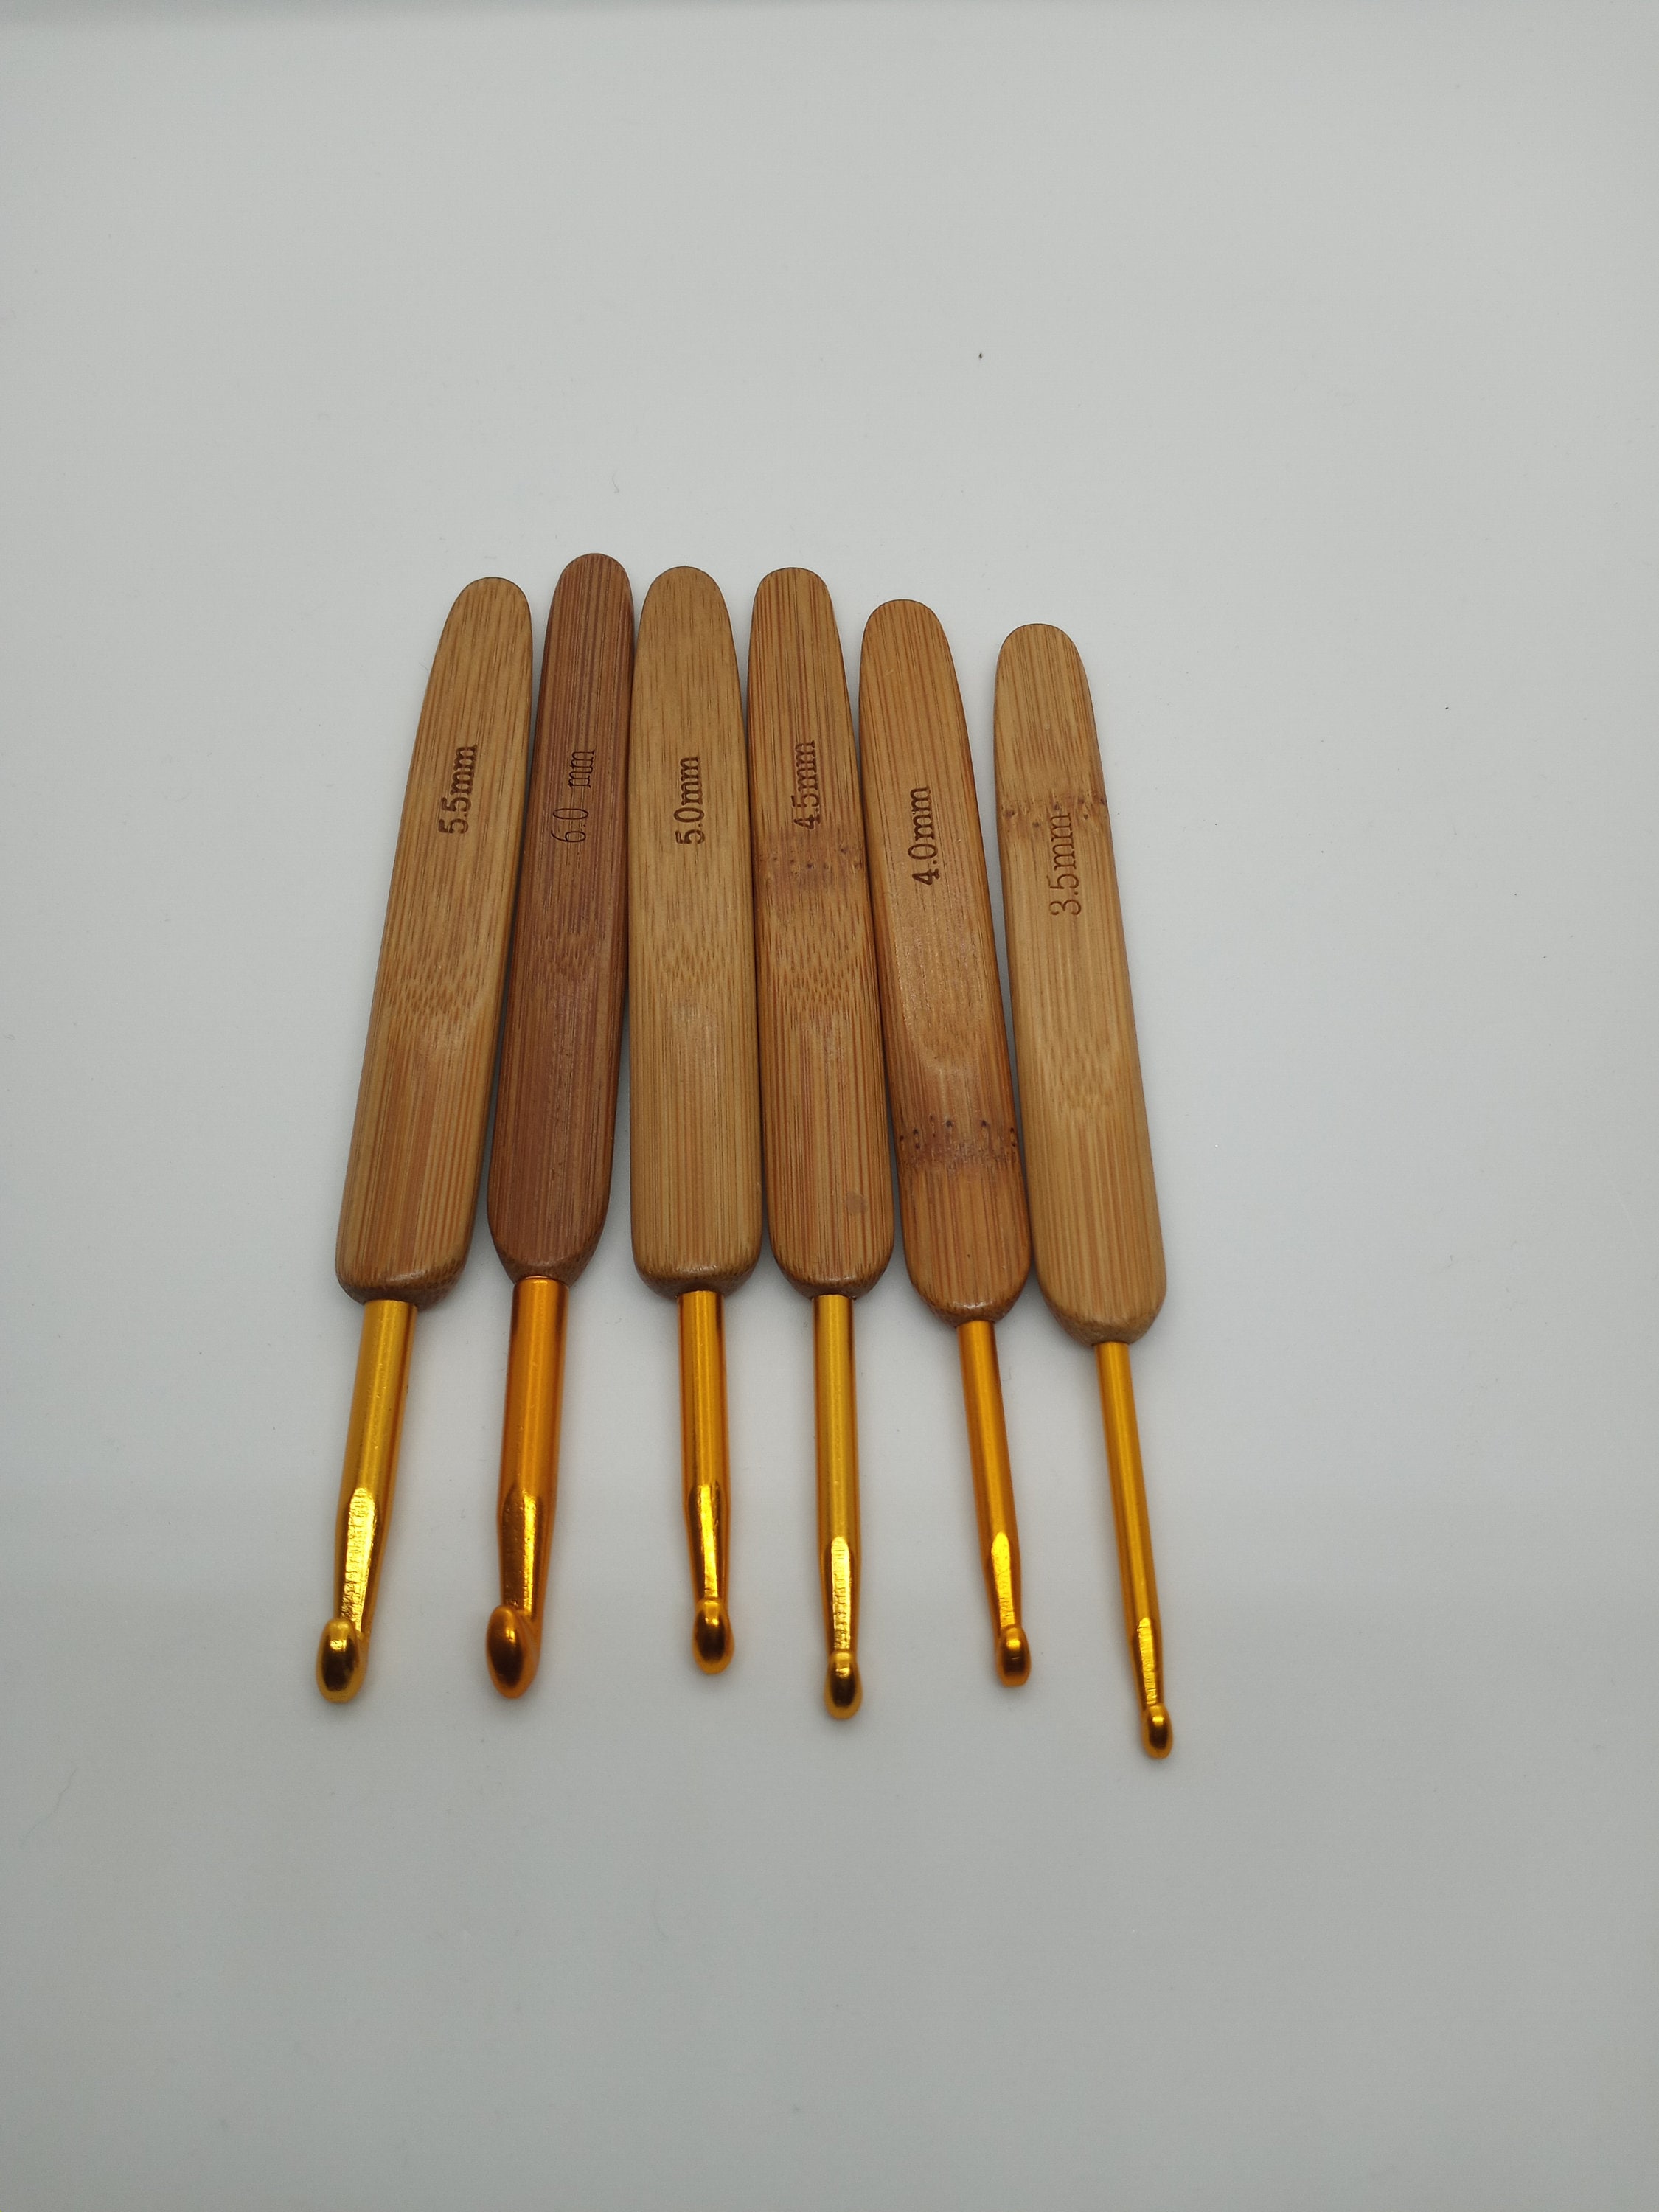 Buy Tunisian Crochet Hooks With Cable Chords, Wooden Hooks, Afghan